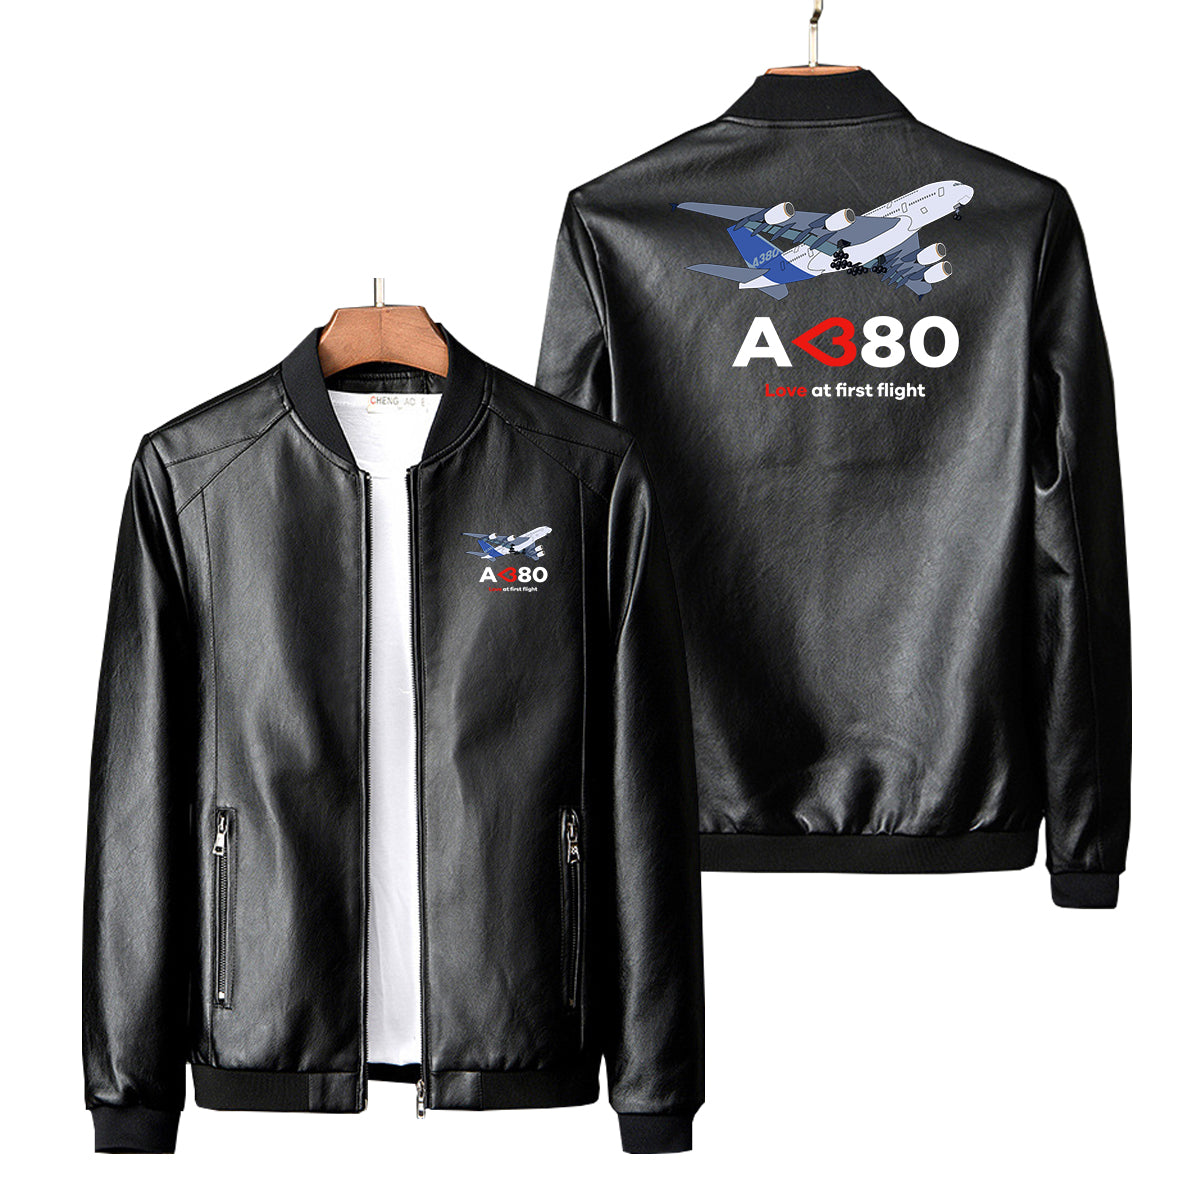 Airbus A380 Love at first flight Designed PU Leather Jackets